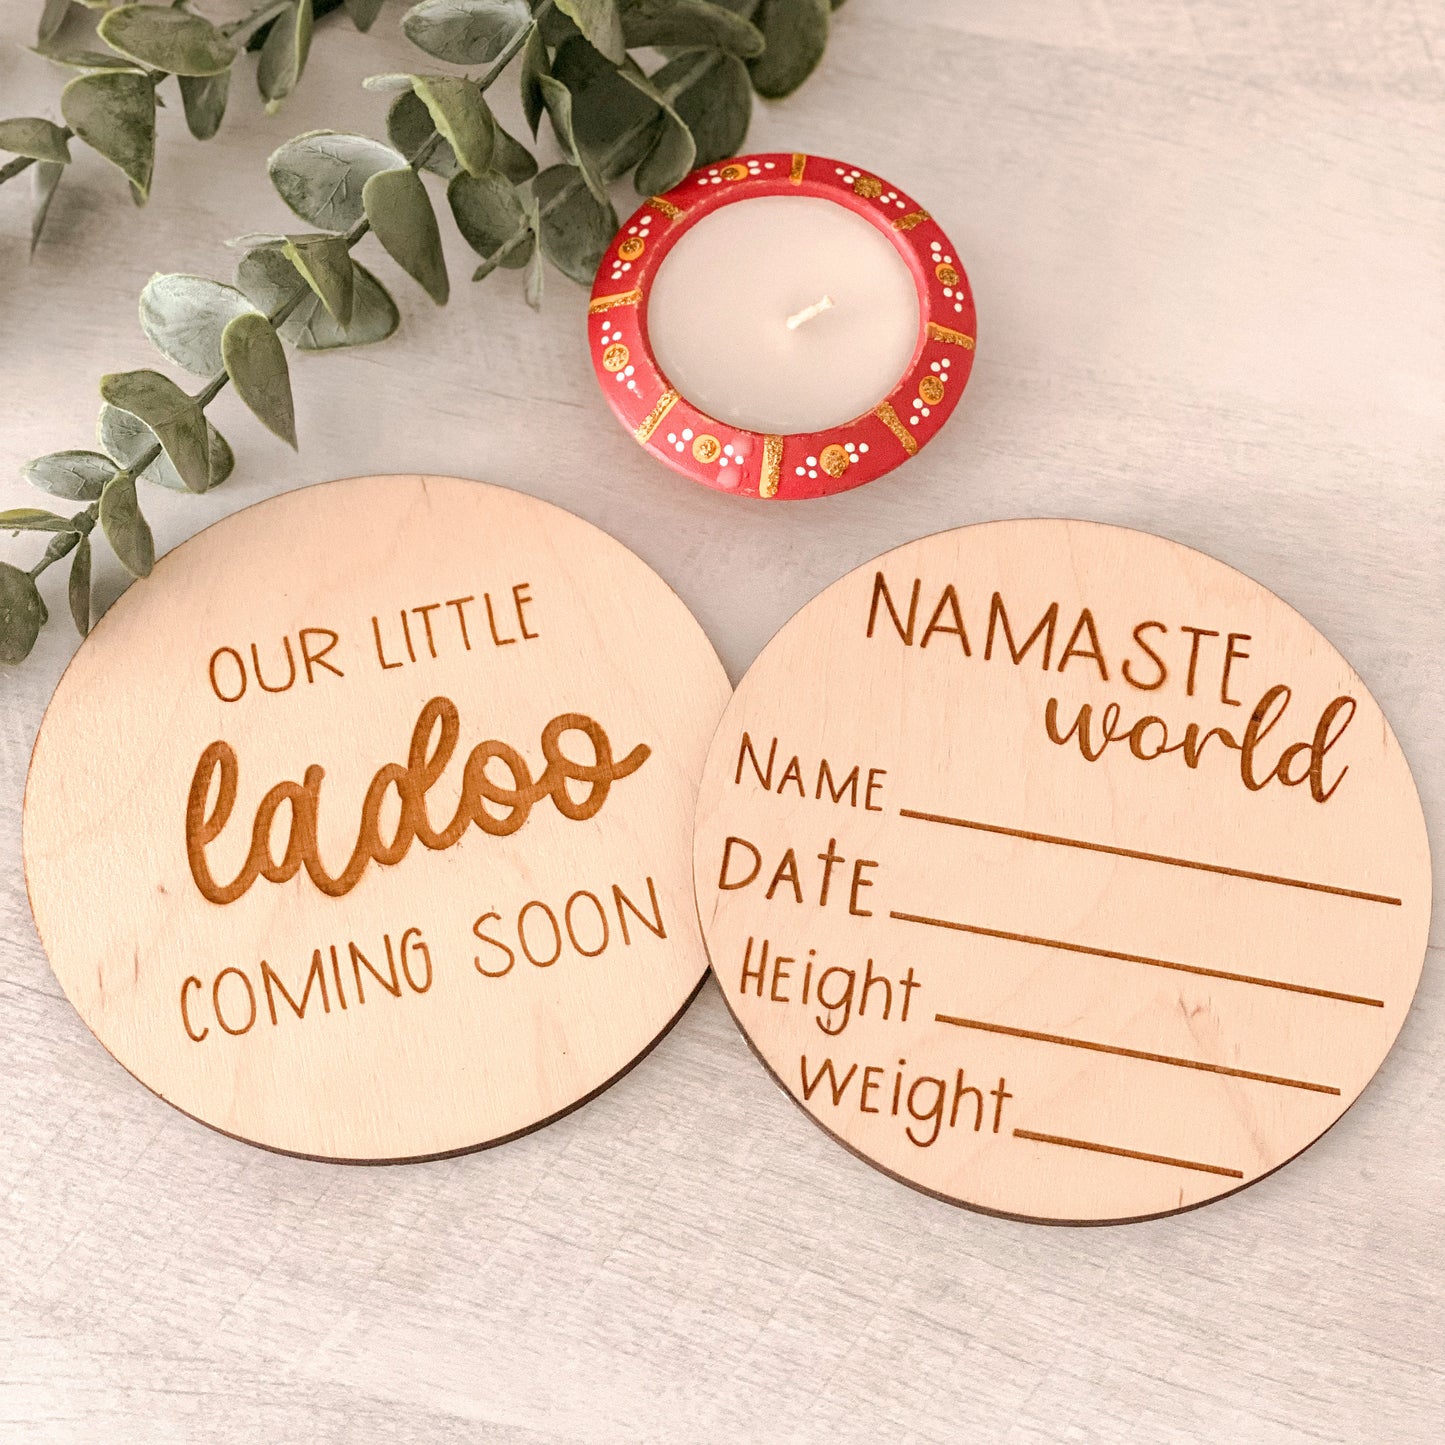 South Asian Baby Announcement Set (Ladoo and Namaste)